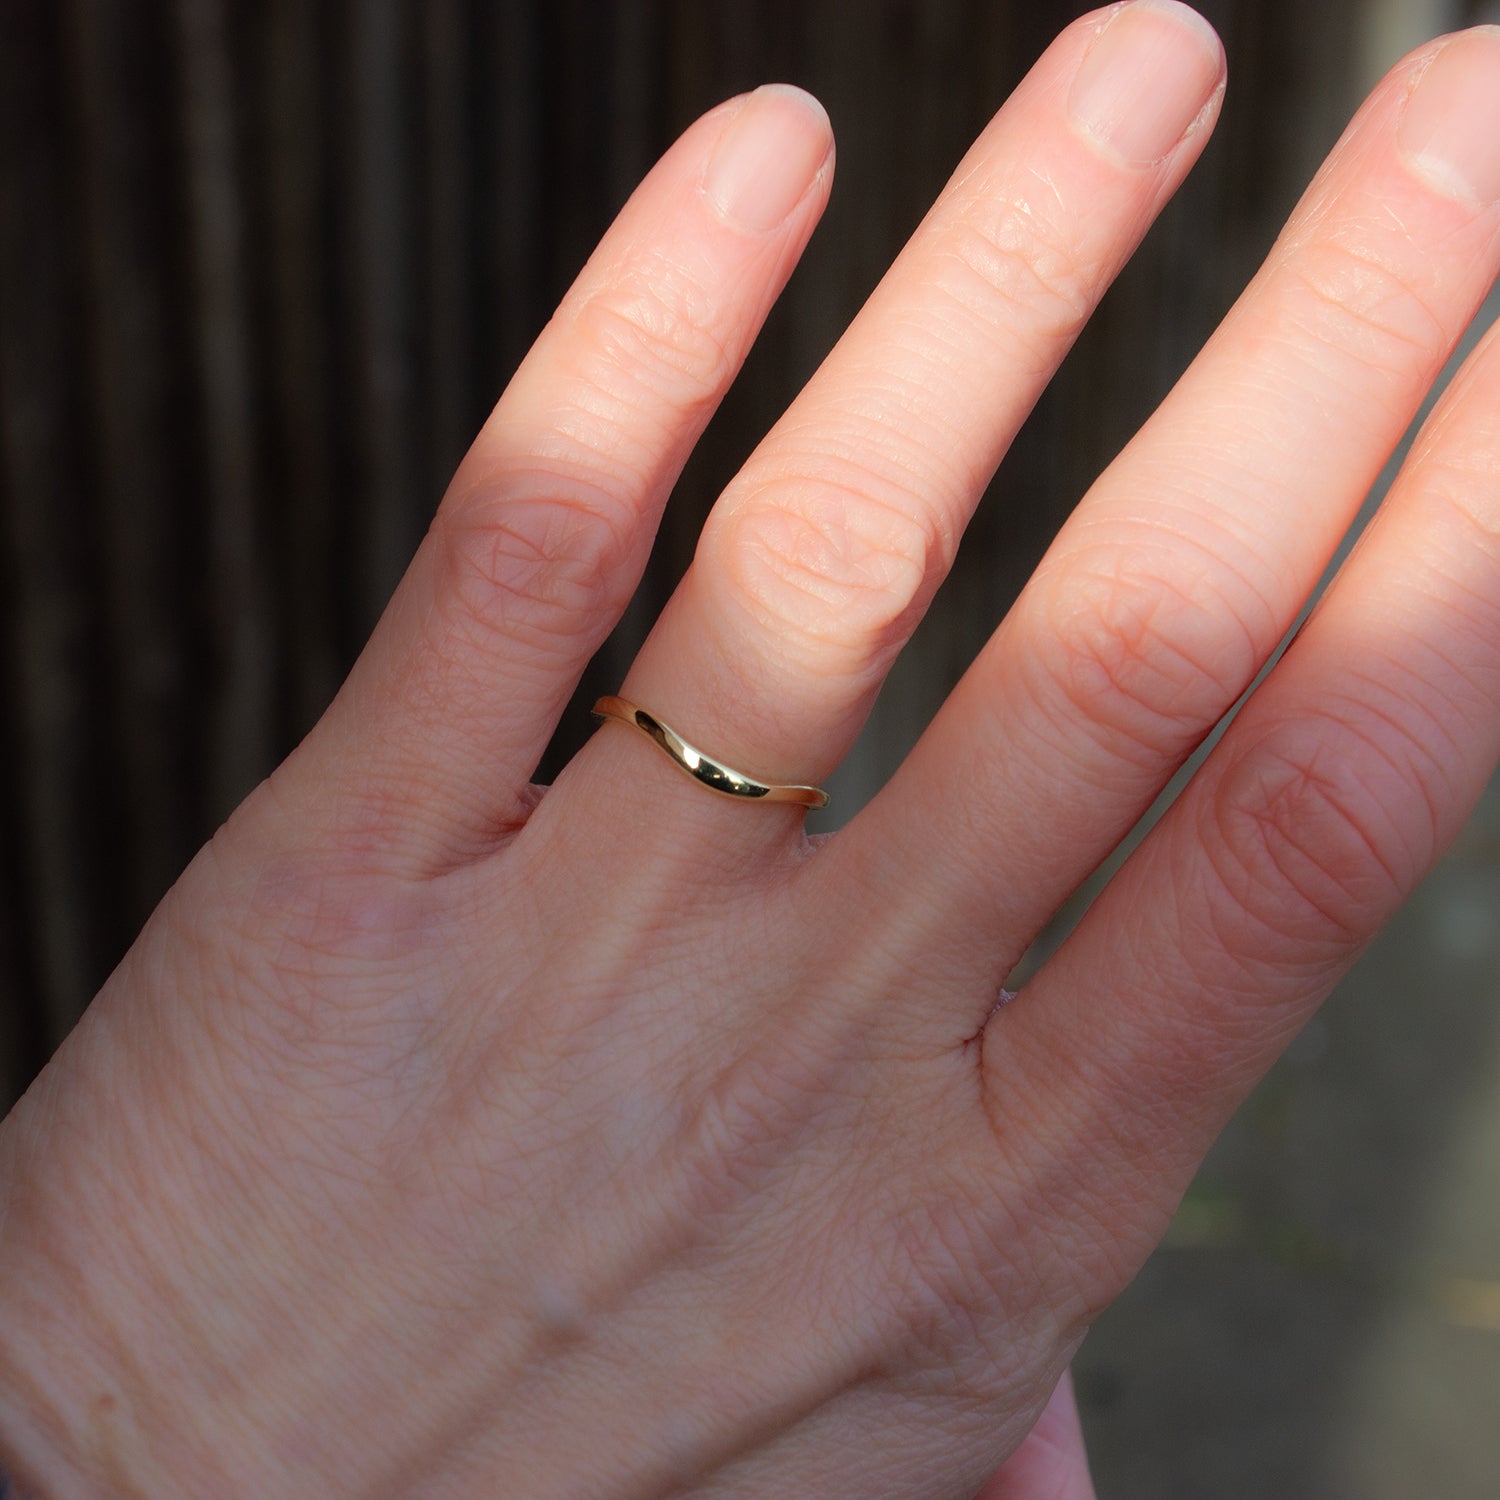 Delicately shaped gold wedding band. Design to gently hug your engagement ring.